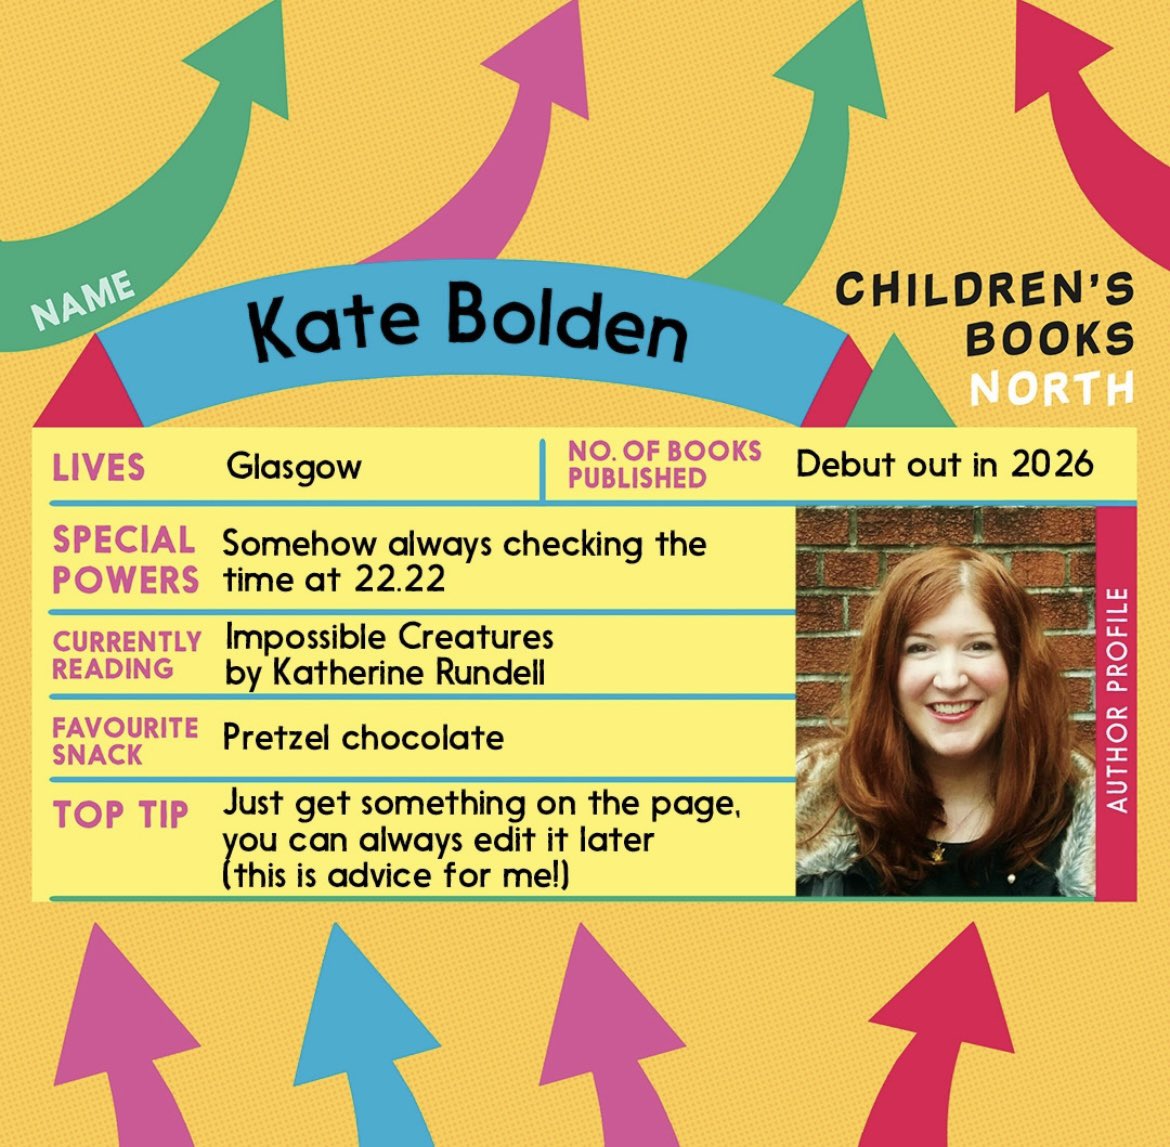 🎉 New members announcement 🎉 We are delighted to share some more new members to our network; please join us in welcoming Kimberly Whittam, Sarah Morrell, and Kate Bolden to Children’s Books North! We are delighted to have you all on board 📚